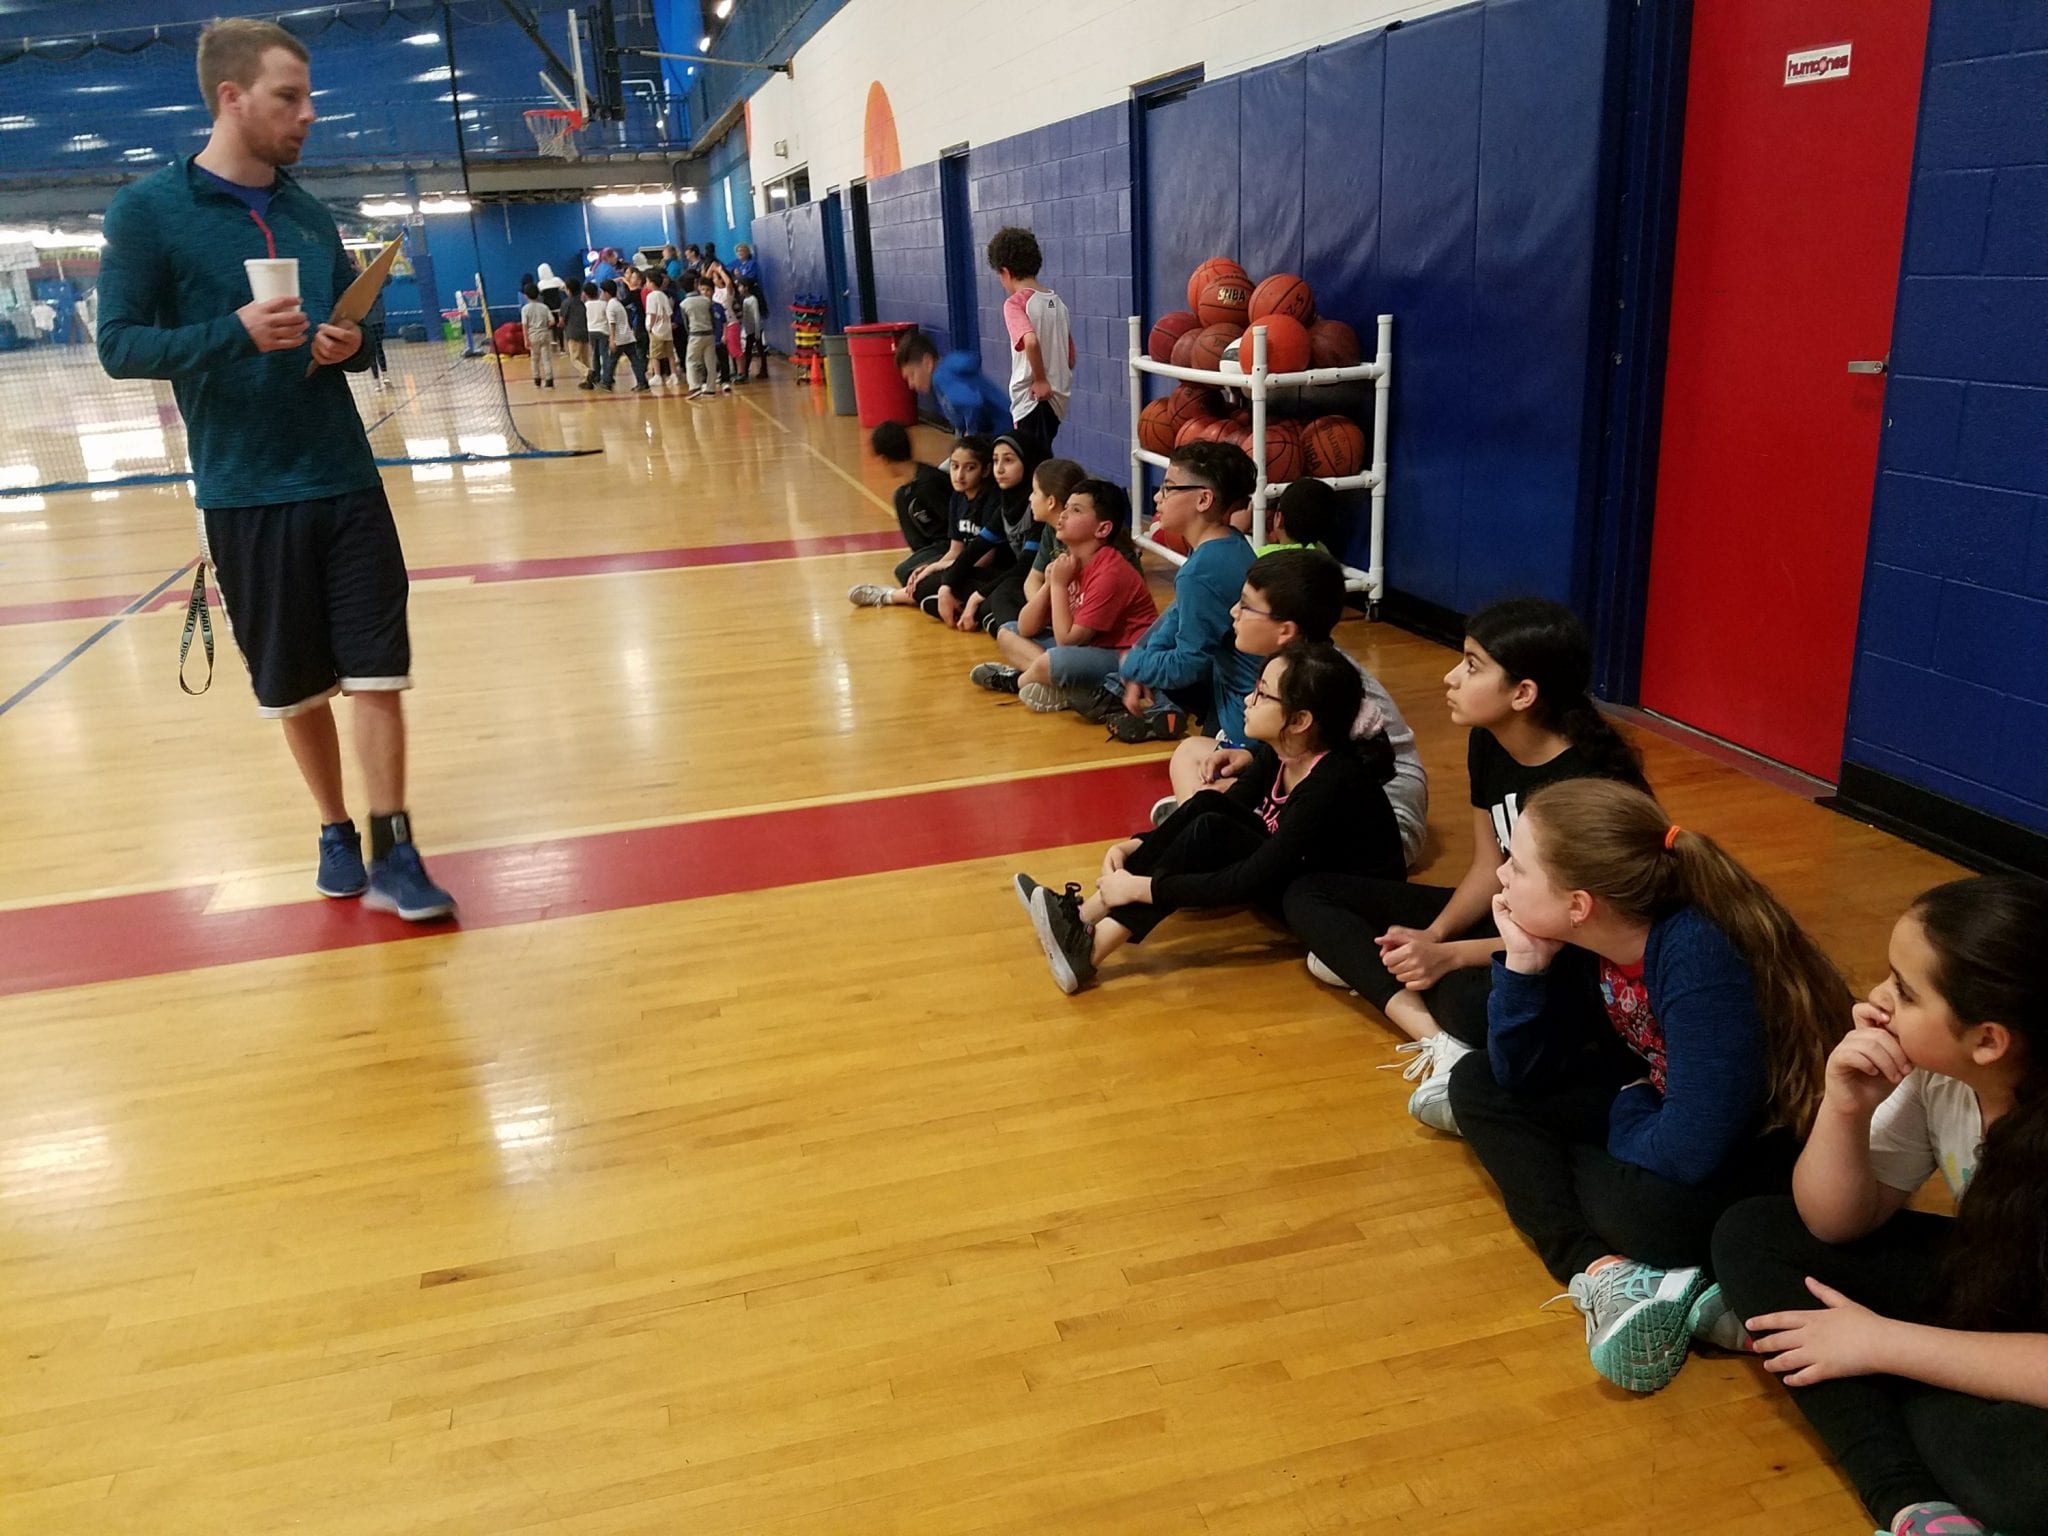 Students listening to directions from their coach